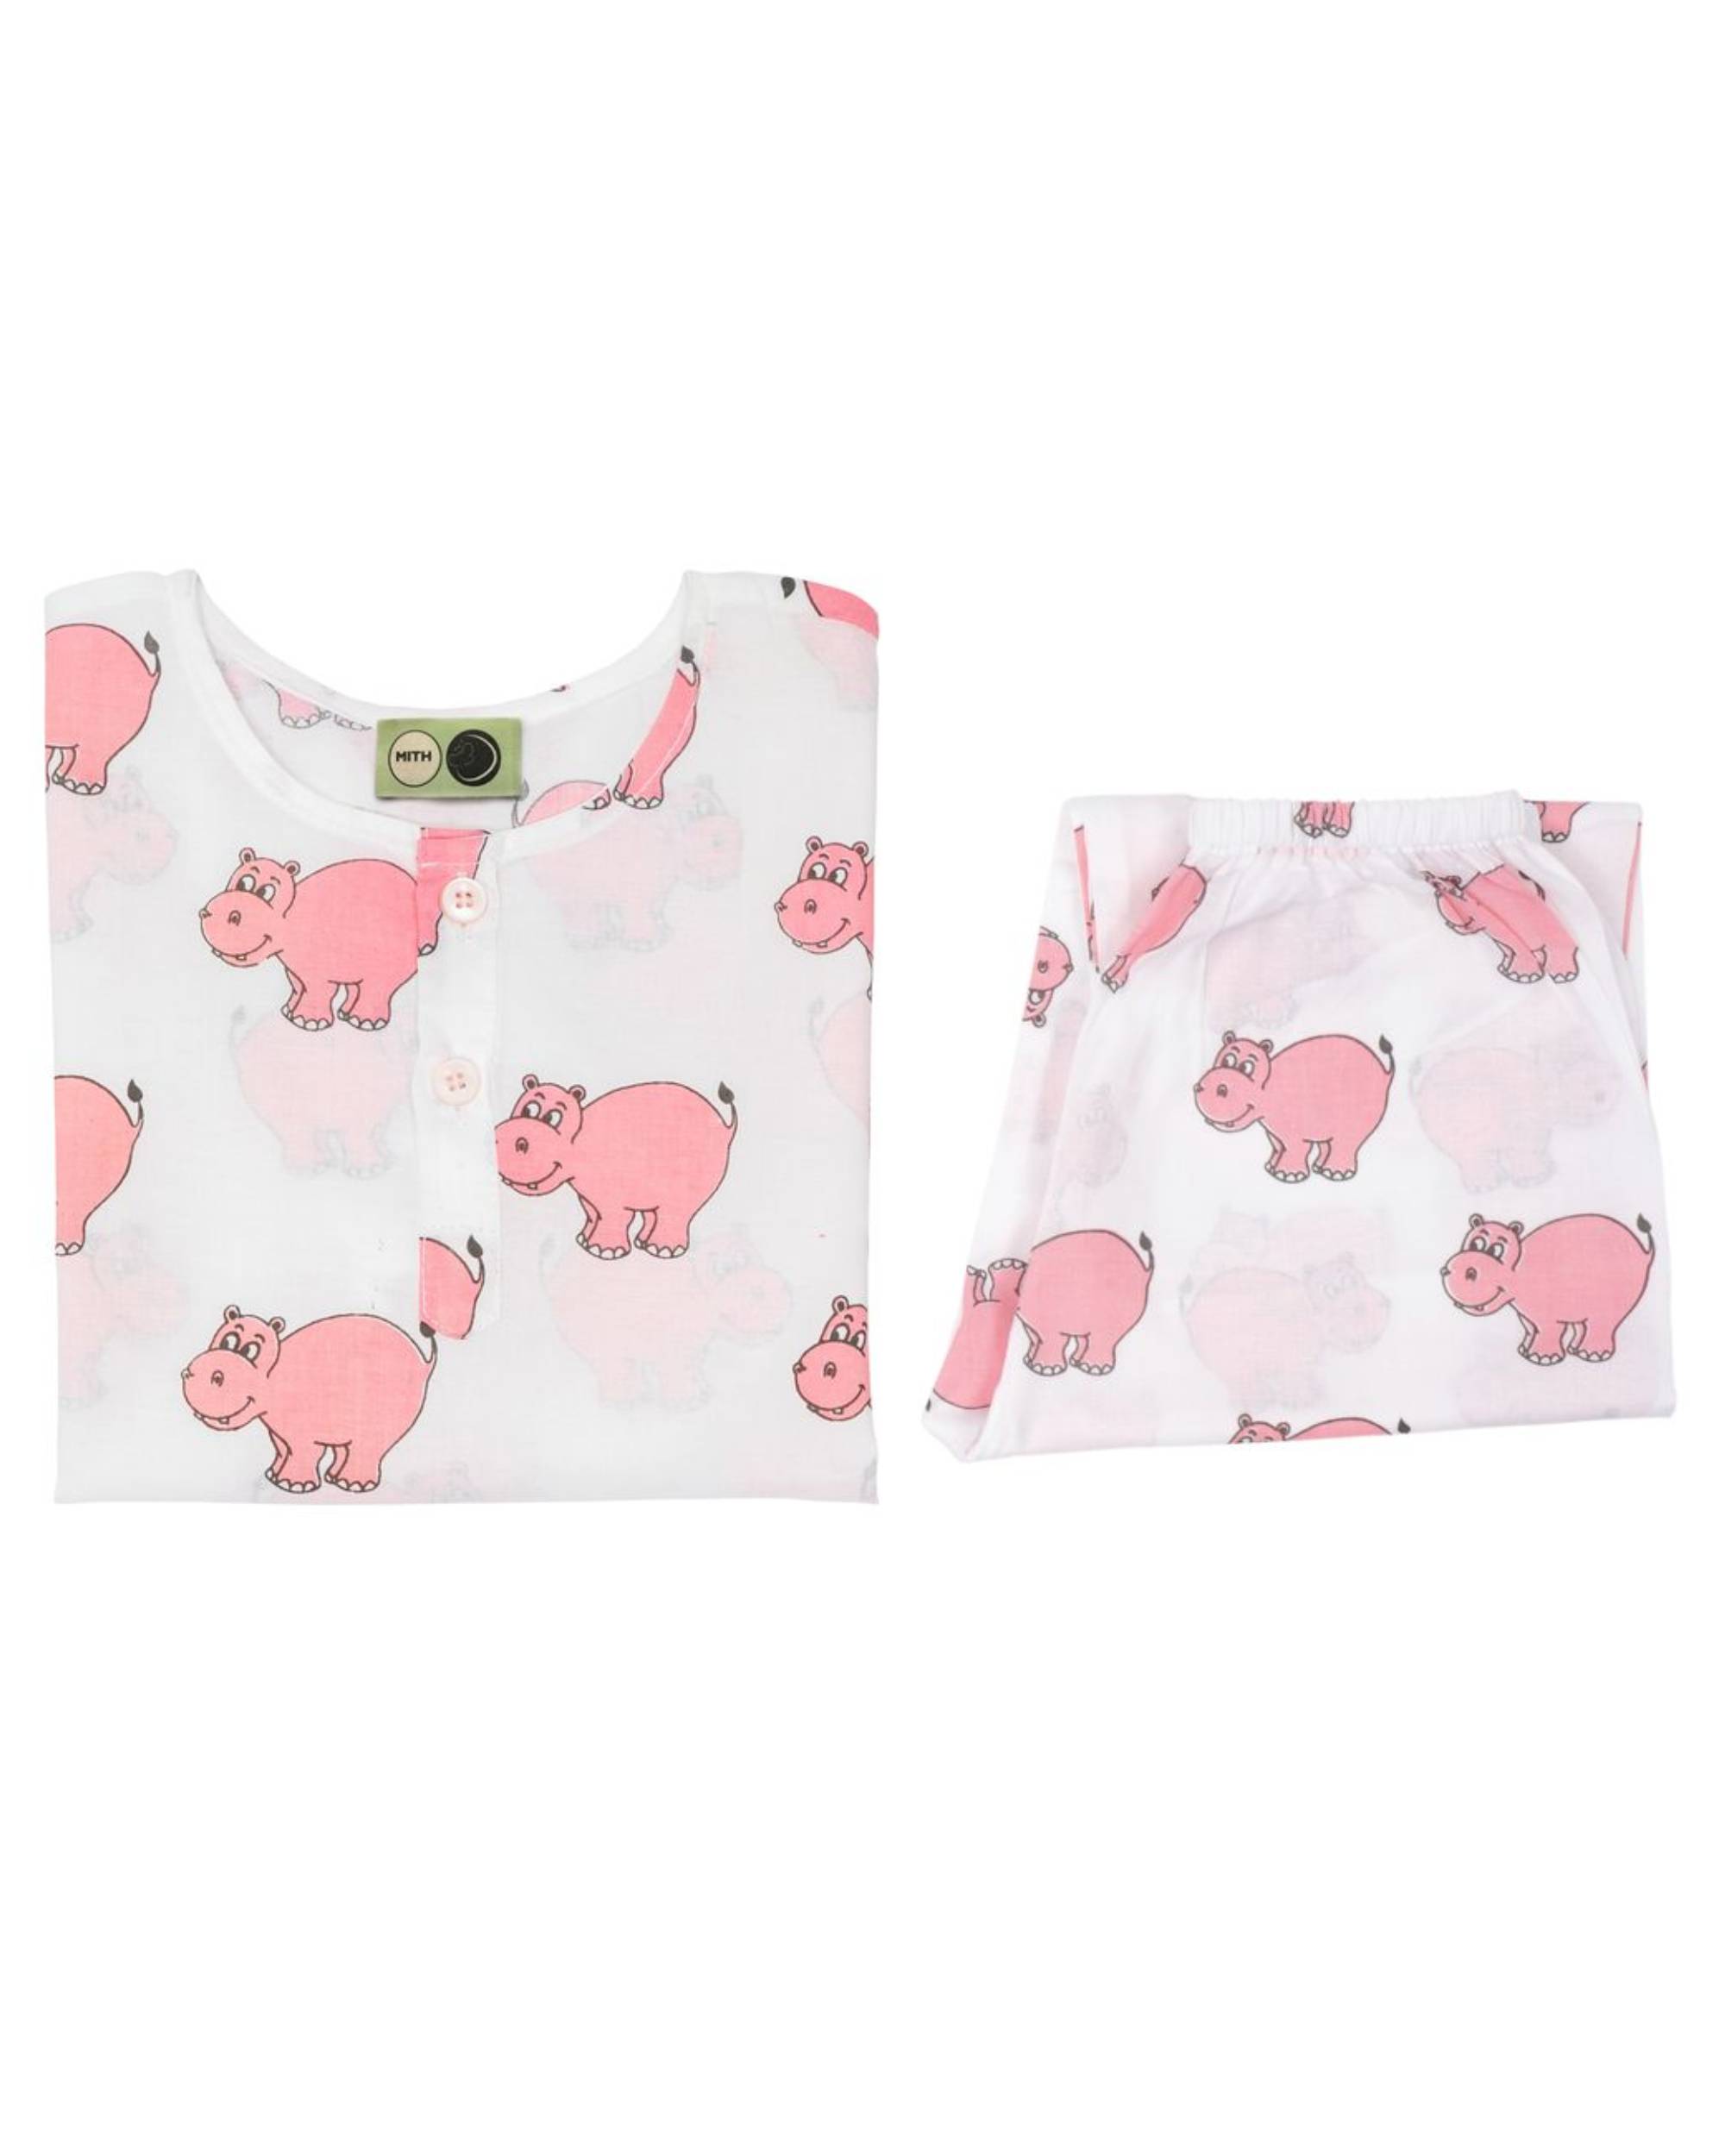 White and pink hippo printed unisex night suit - set of two